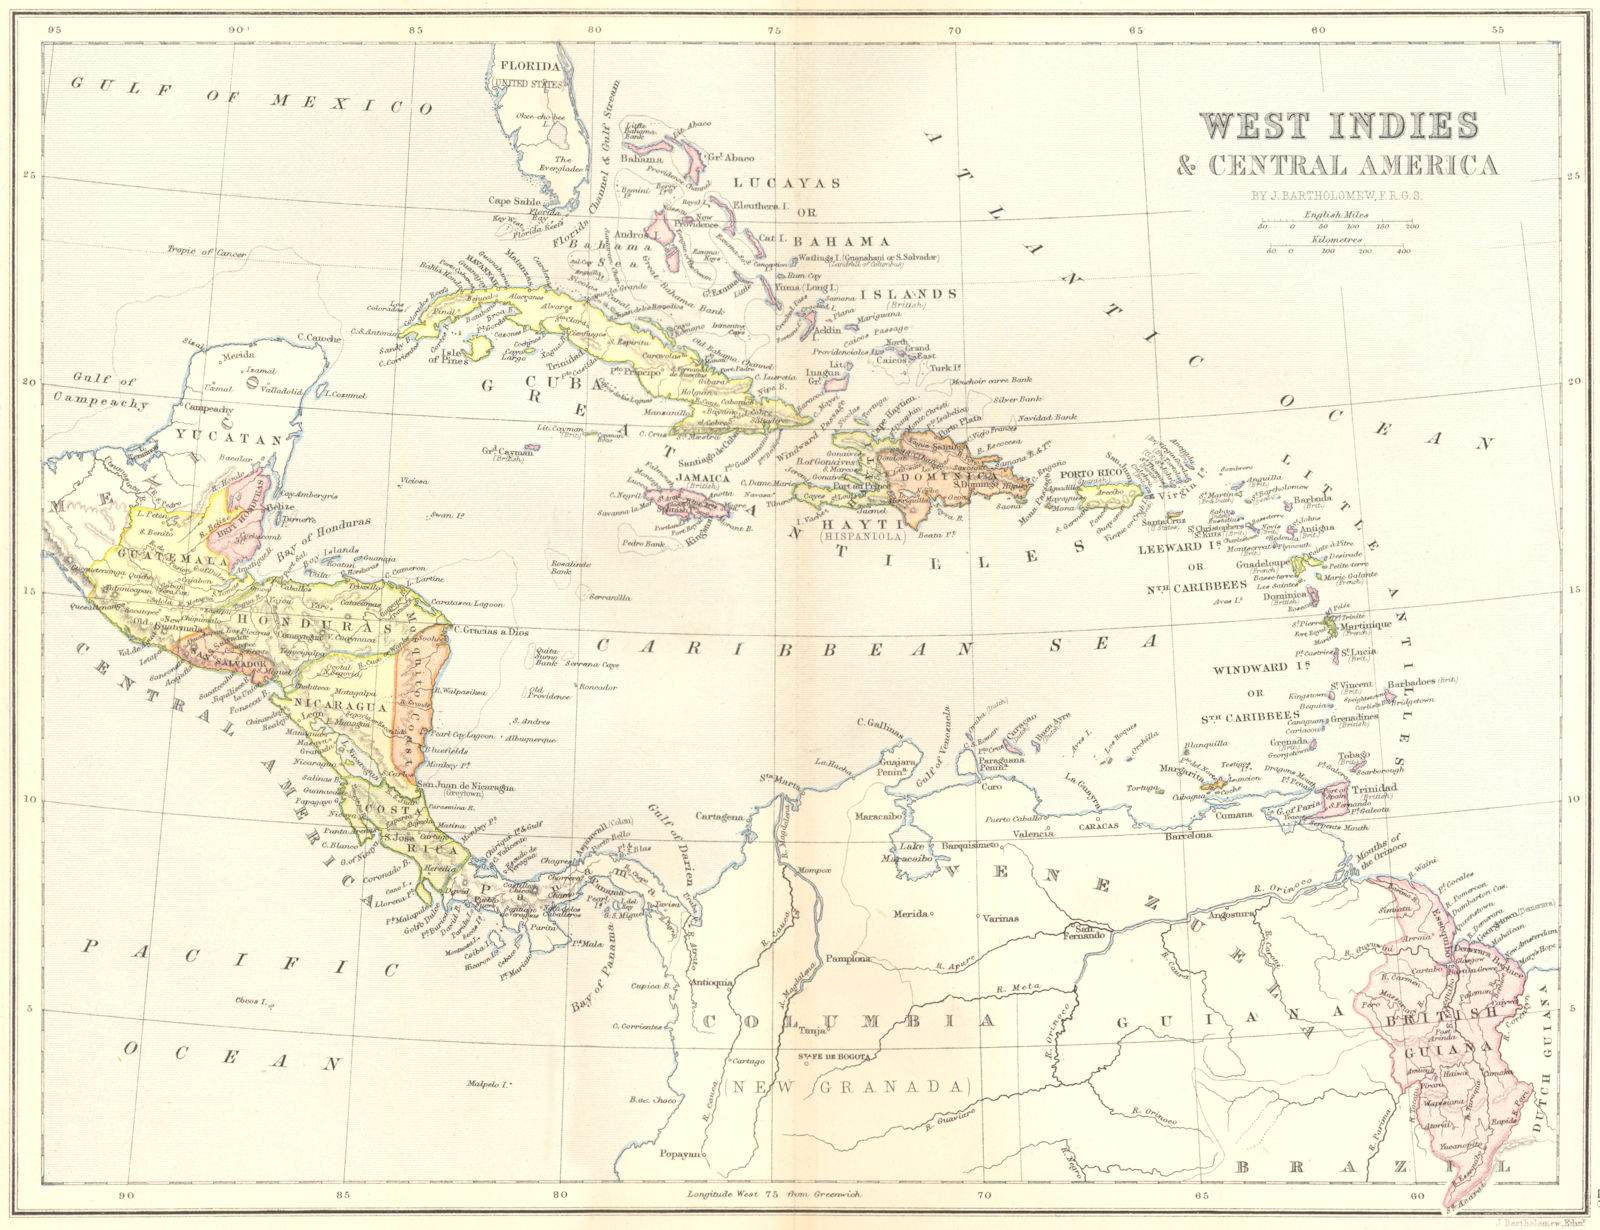 WEST INDIES. & Central America 1870 old antique vintage map plan chart